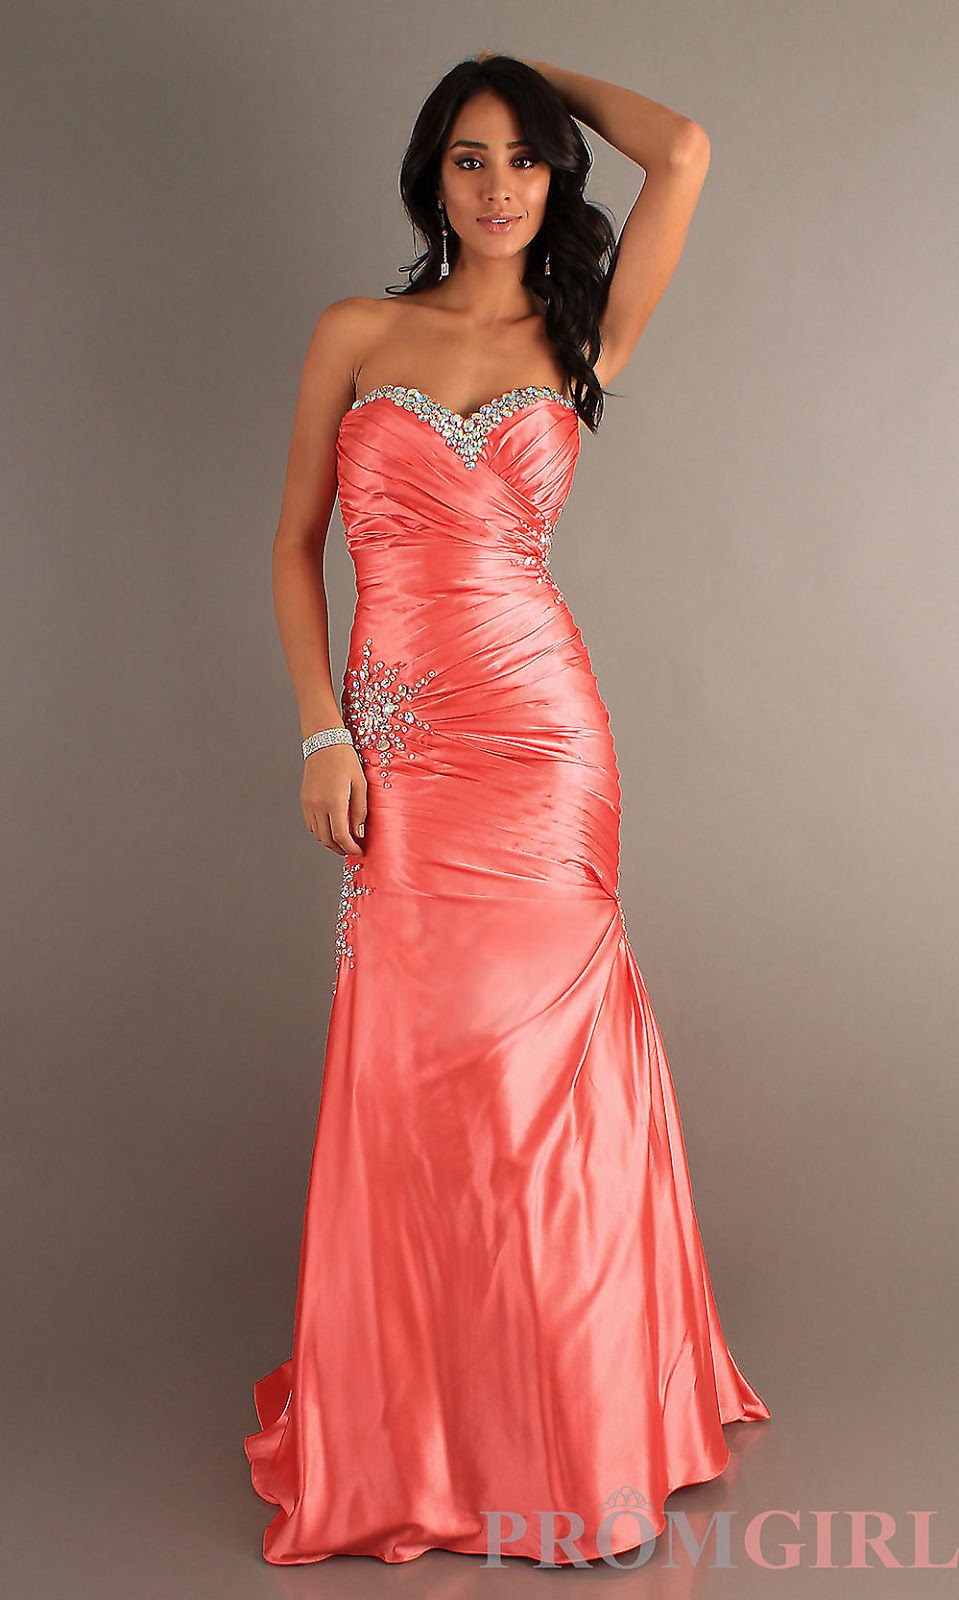 How to Choose Suitable Prom Dress of Five Factors